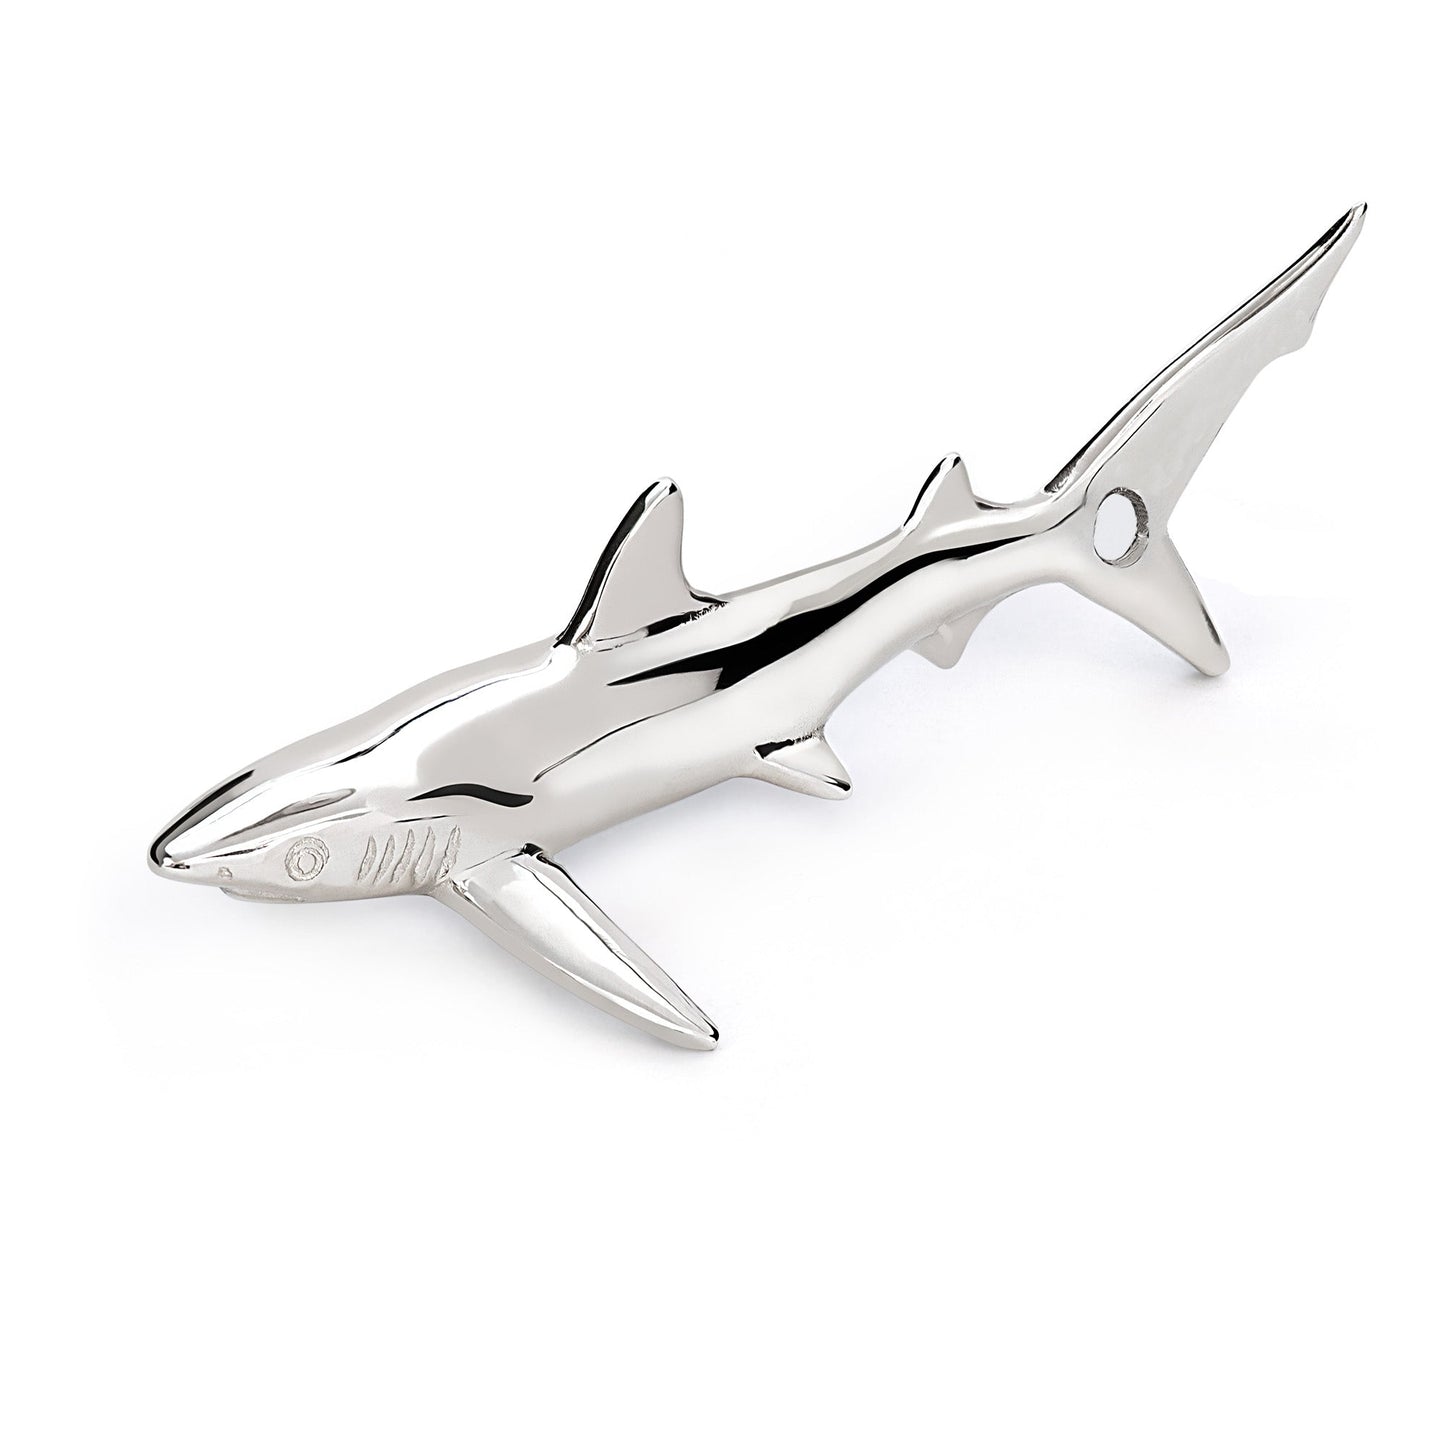 Shark Necklace for Men and Women- Sterling Silver Blue Shark Pendant, Gifts for Shark Lovers, Blue Shark Charm Necklace, Joe Romeiro Necklace - The Tool Store